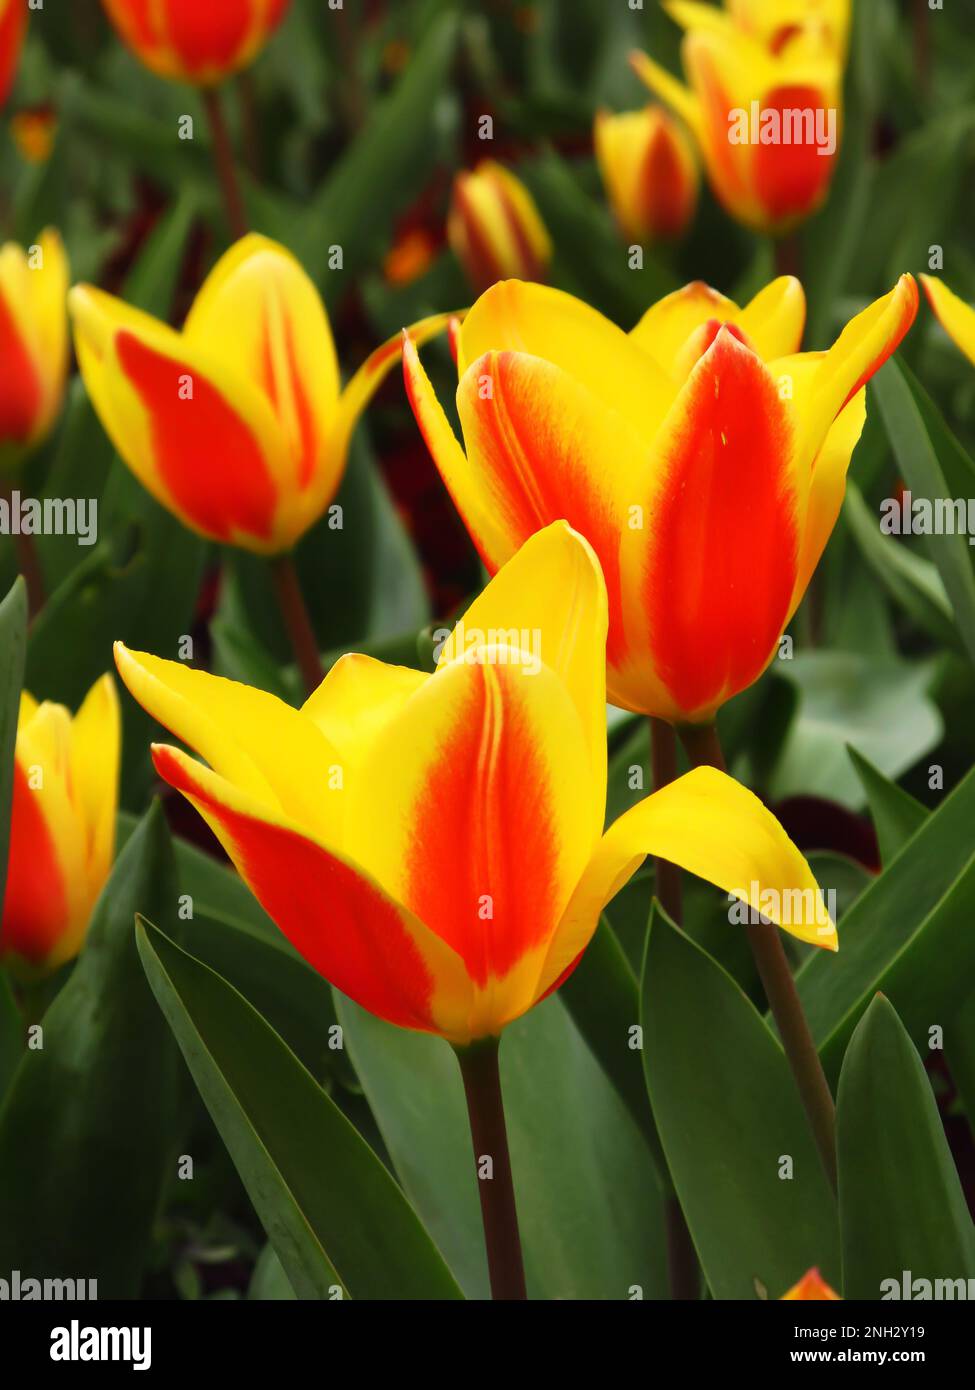 A flower bed of yellow and orange water-lily tulips, Tulipa kaufmanniana, in full Bloom Stock Photo